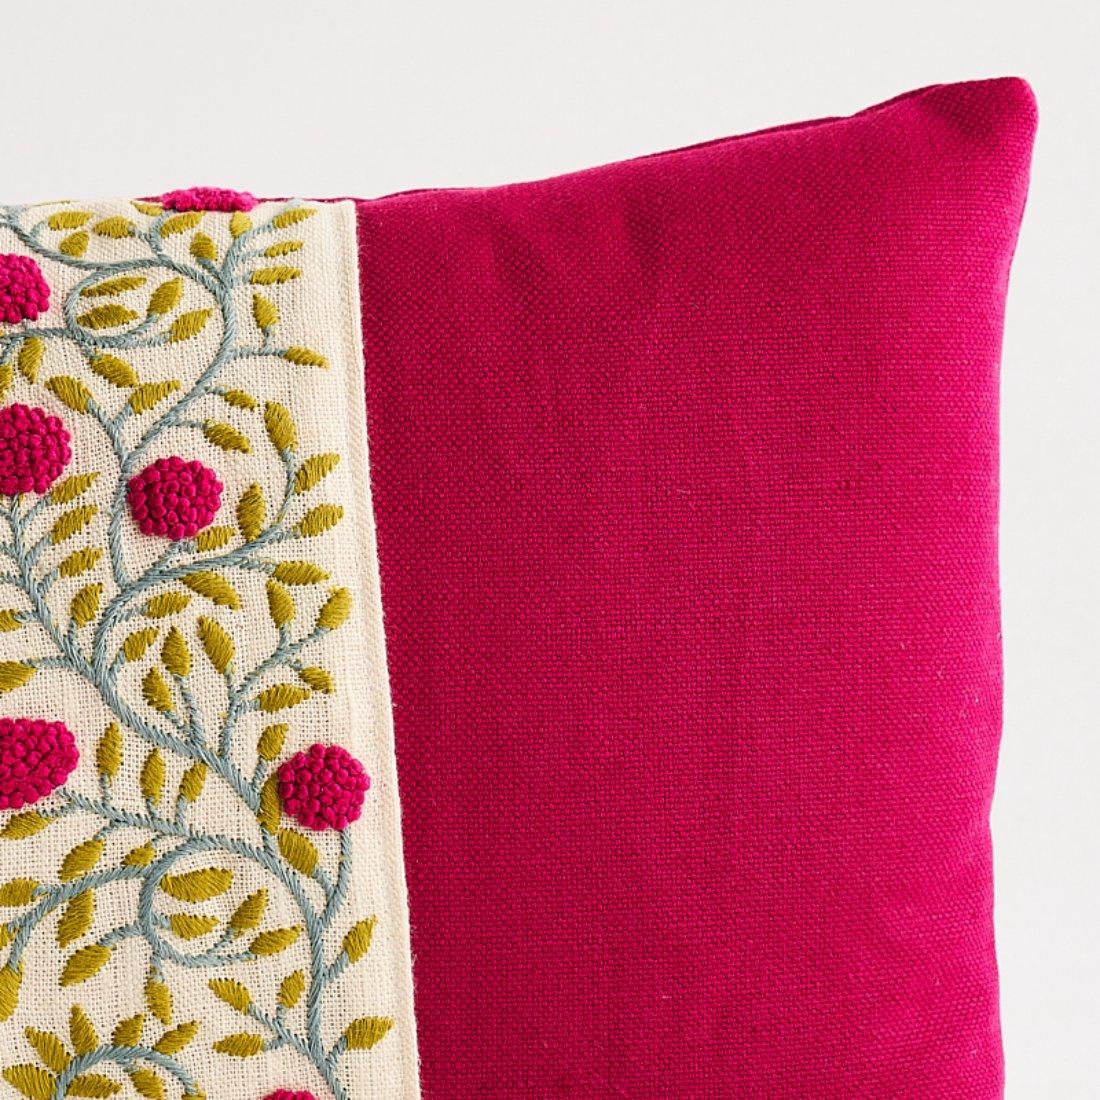 This pillow features Ashoka Tape with a knife edge finish. With a winding, embroidered floral design accentuated with French Knots, Ashoka Tape adds an element of handcrafted beauty. Body of pillow is Piet Performance Linen. Pillow includes a